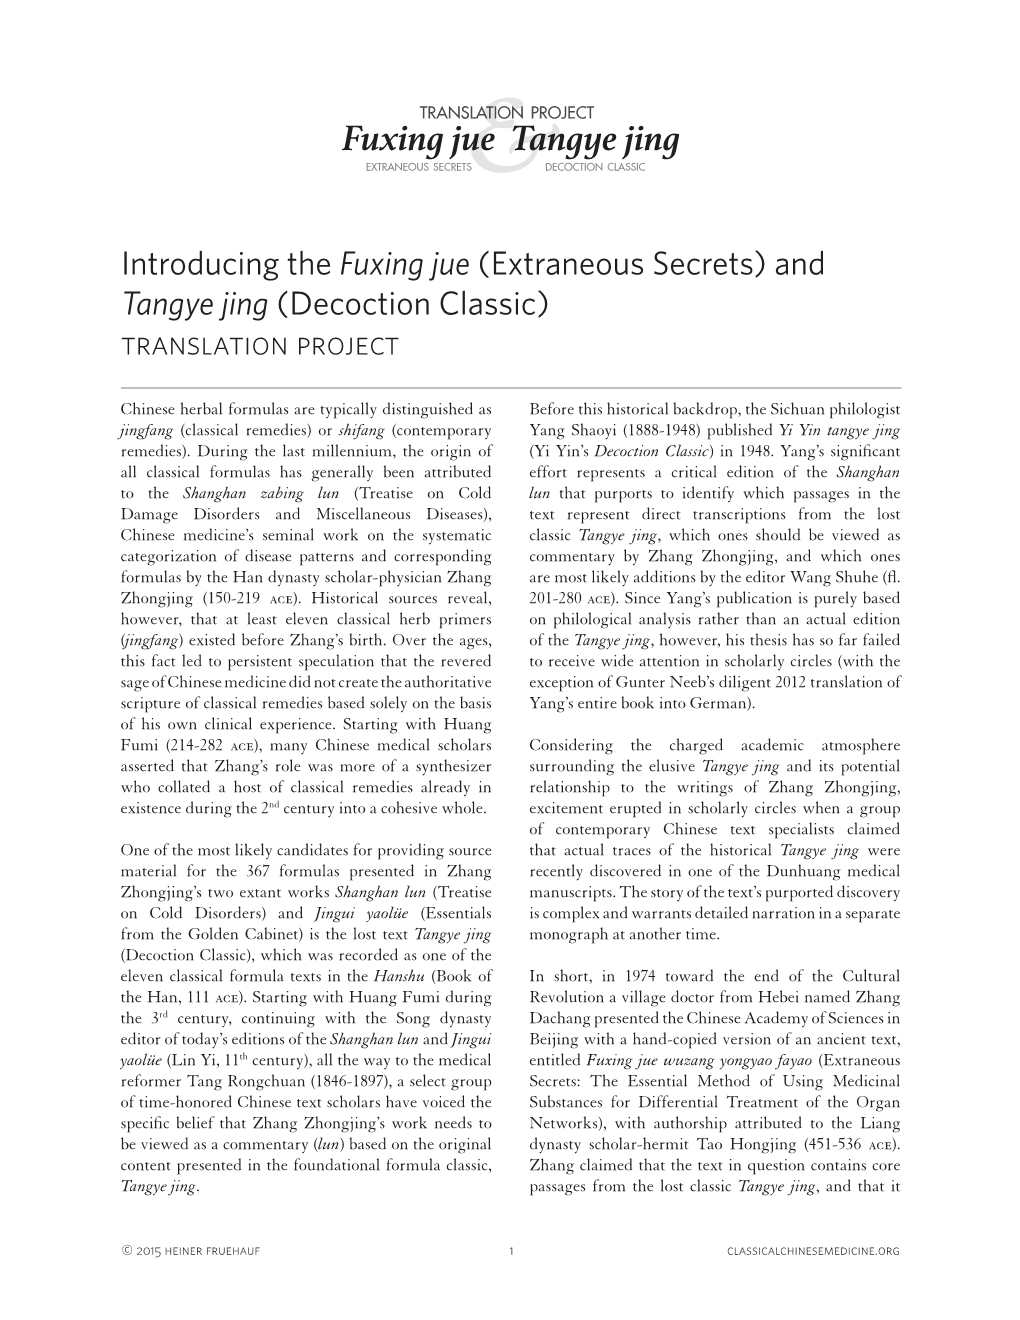 Introducing the Fuxing Jue (Extraneous Secrets) and Tangye Jing (Decoction Classic) Translation Project